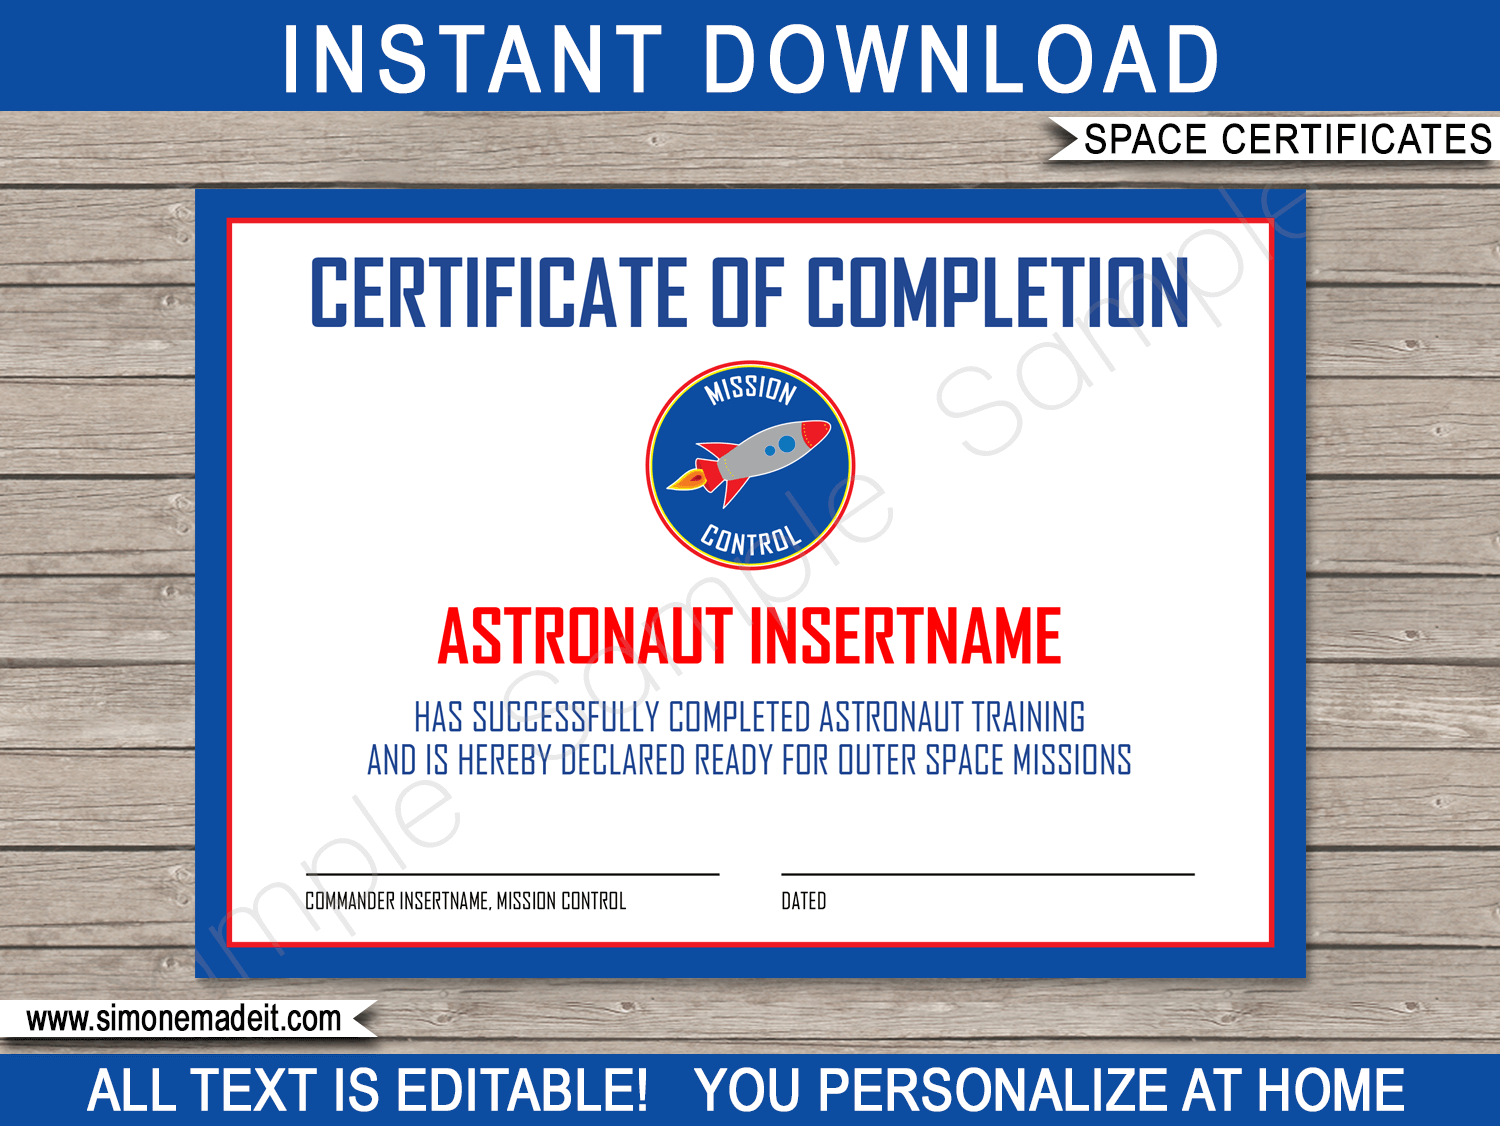 Space Astronaut Training Certificate Template | Certificate of Completion of Astronaut Training | Mission Control | DIY Editable & Printable Template | Outer Space Theme Birthday Party | $3.00 INSTANT DOWNLOAD via simonemadeit.com